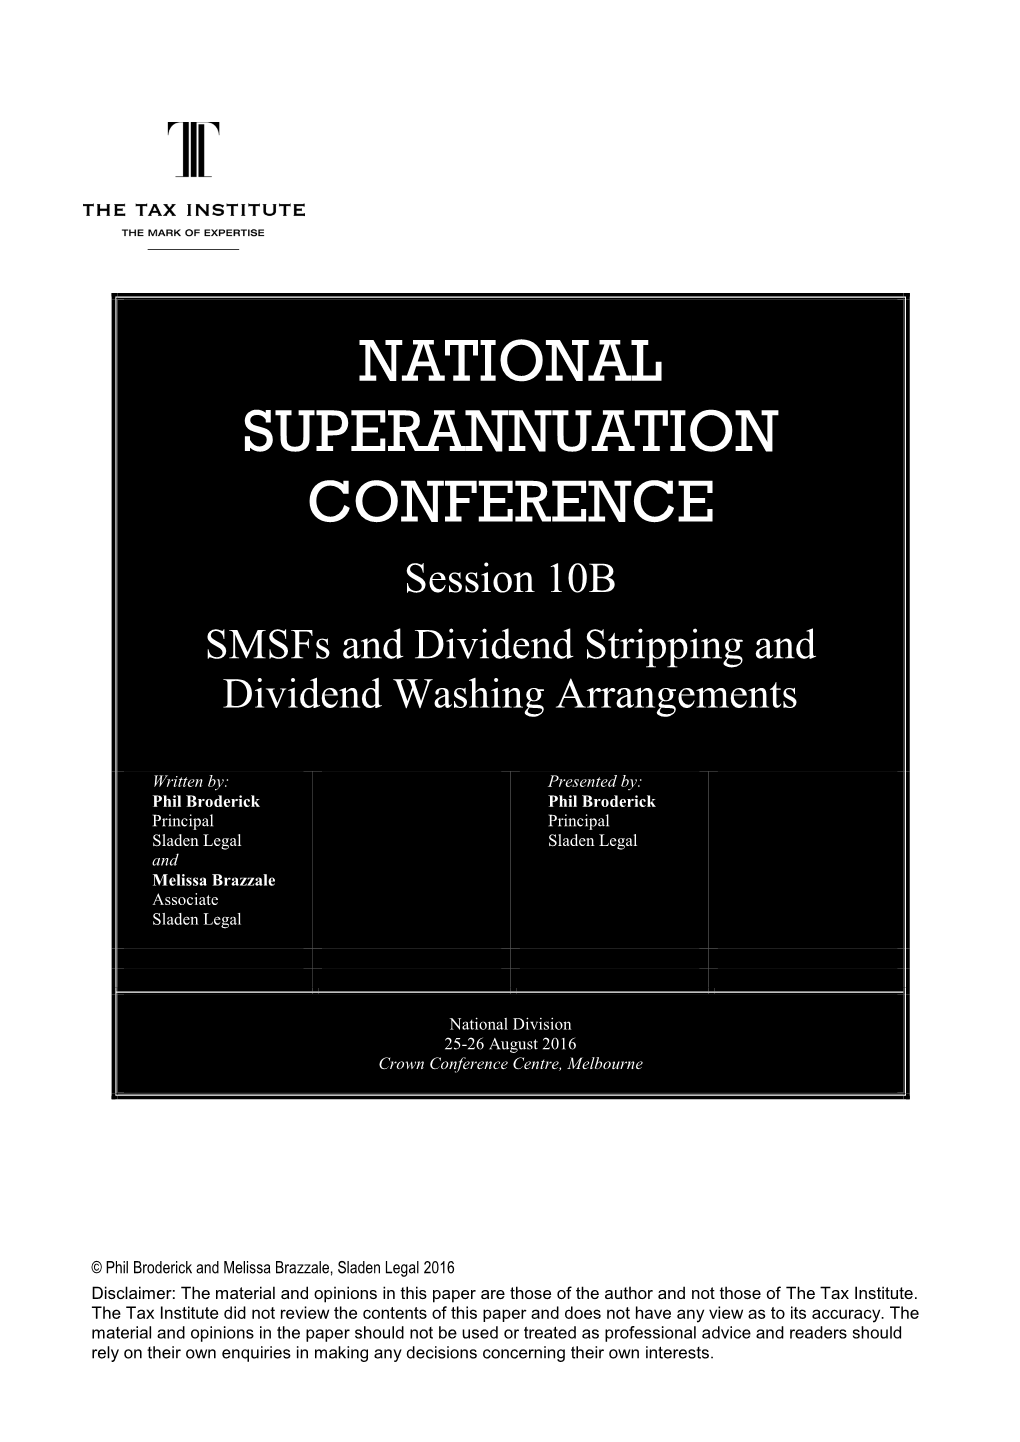 NATIONAL SUPERANNUATION CONFERENCE Session 10B Smsfs and Dividend Stripping and Dividend Washing Arrangements